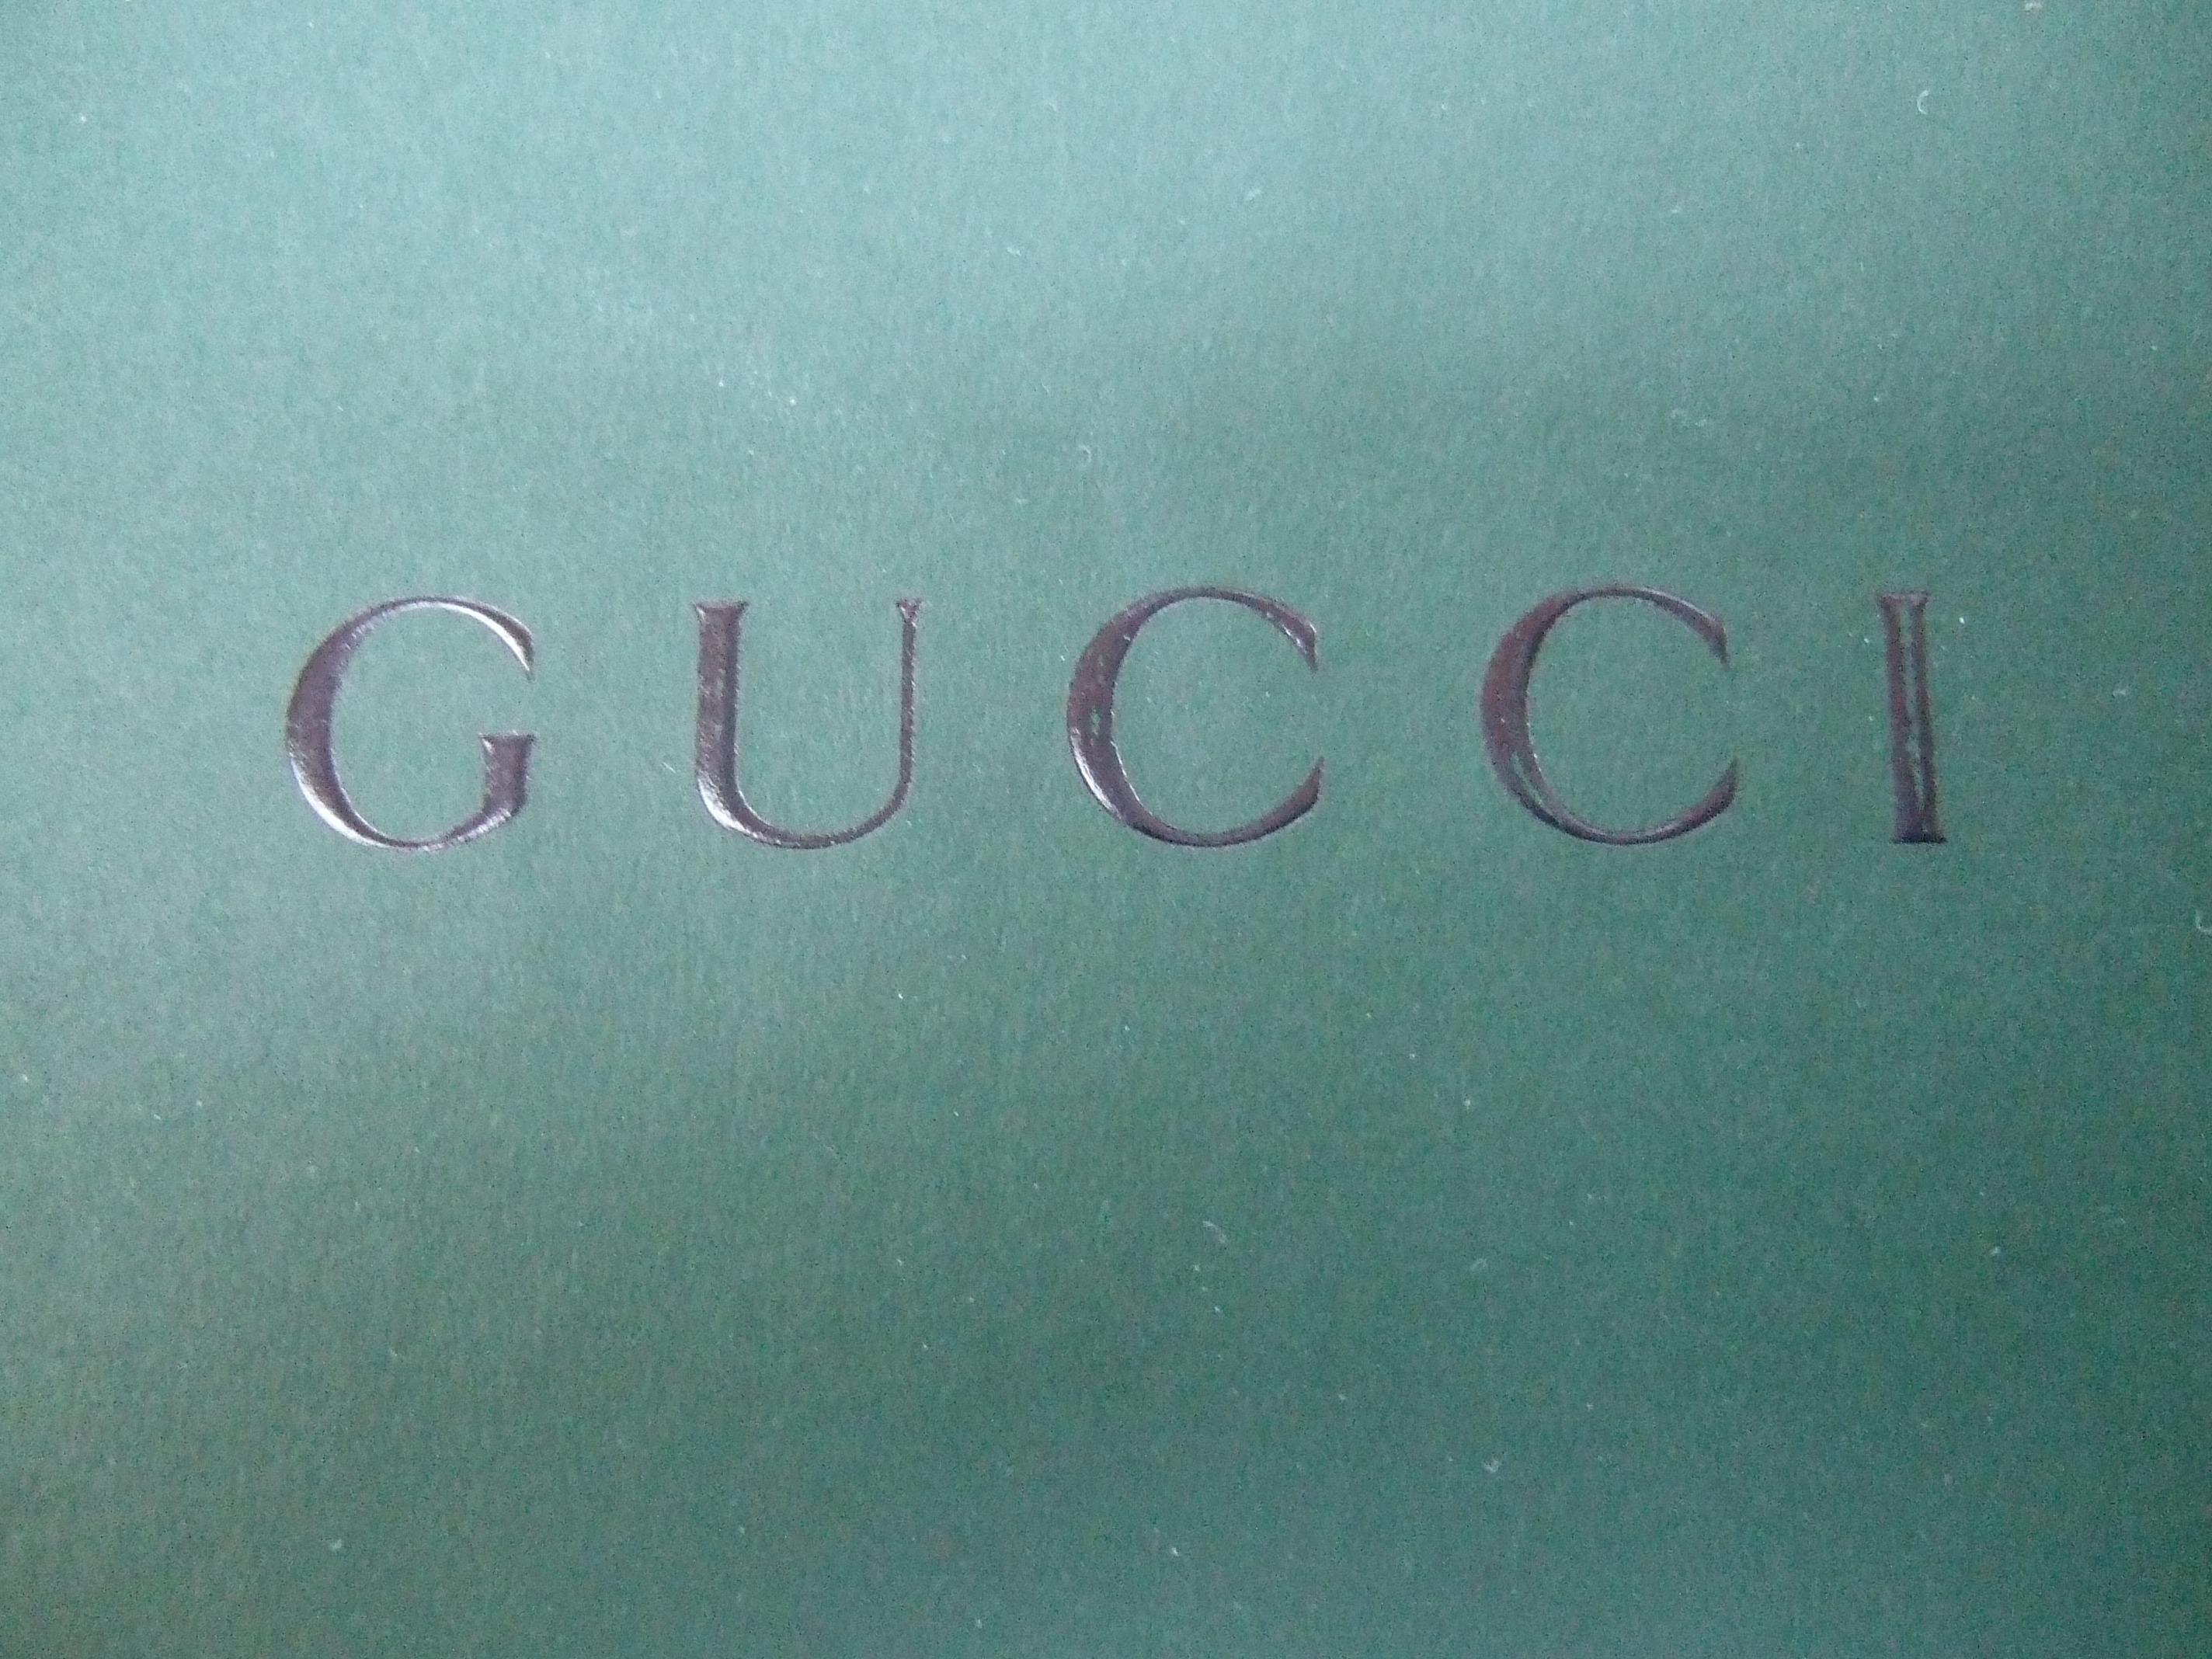 Gucci Equine Design Note Cards & Journal Book Stationery Set in Gucci Box c 1990 For Sale 2